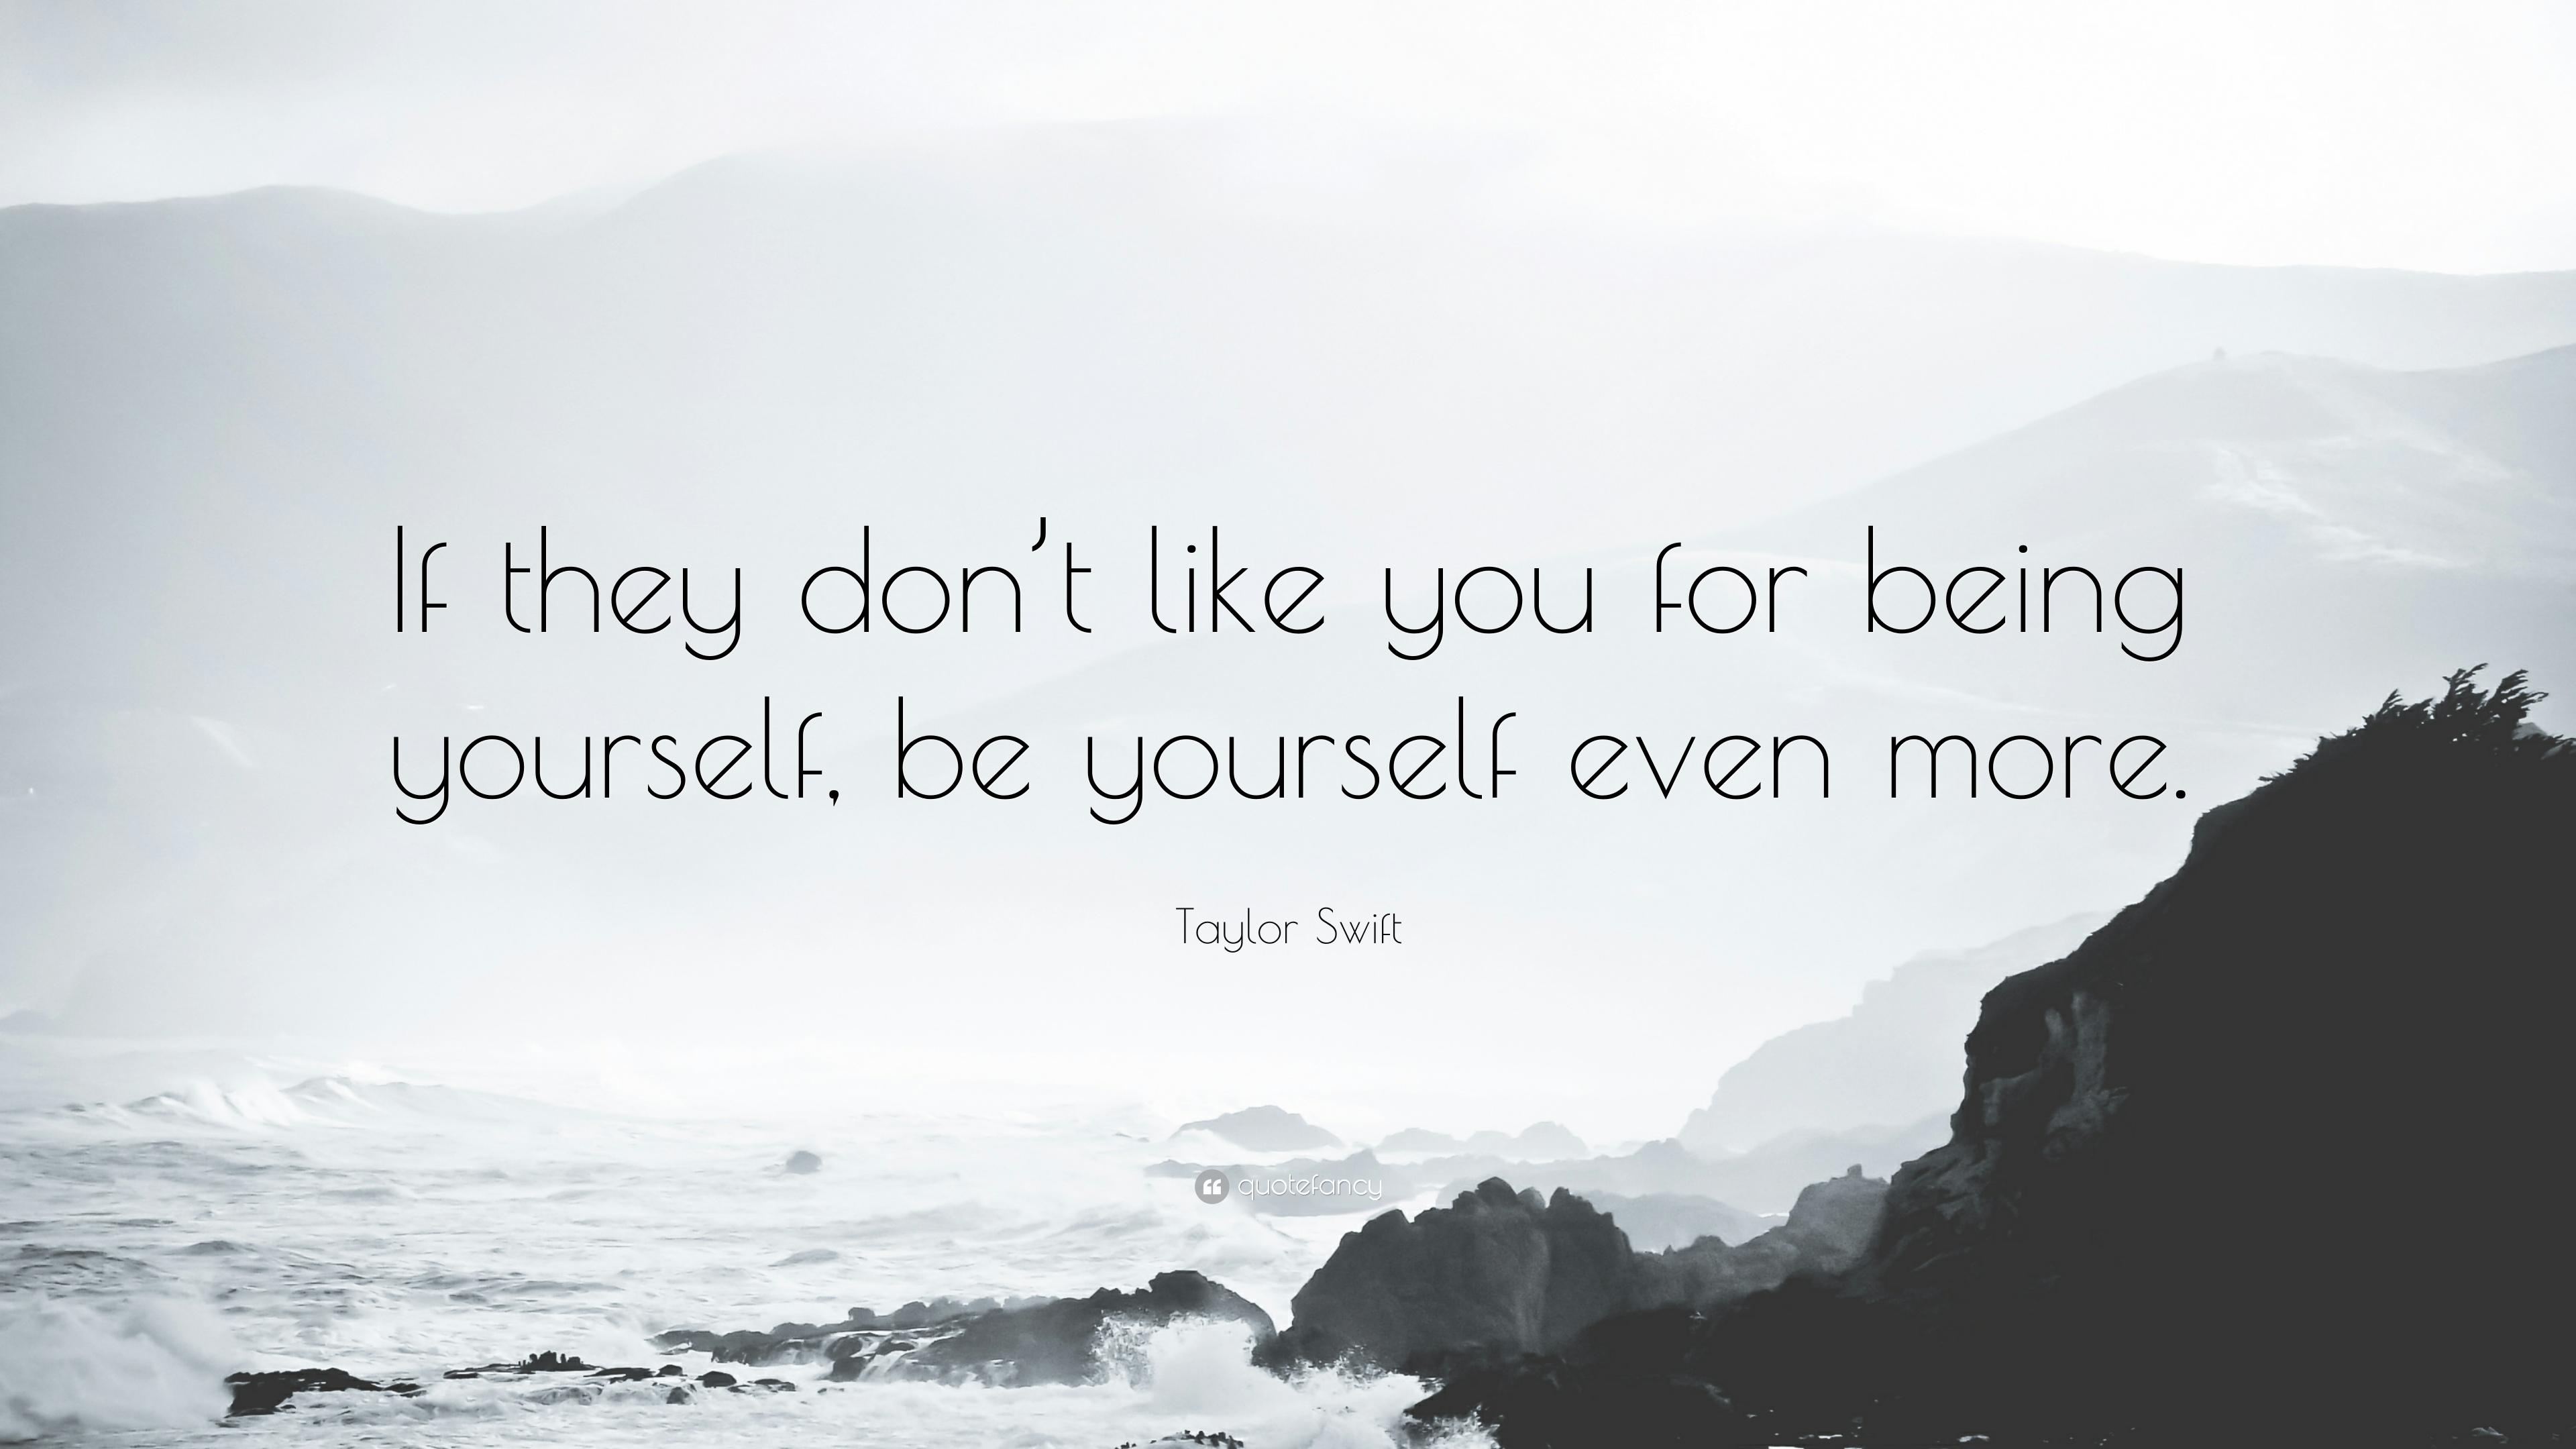 Taylor Swift Quote: “If they don't like you for being